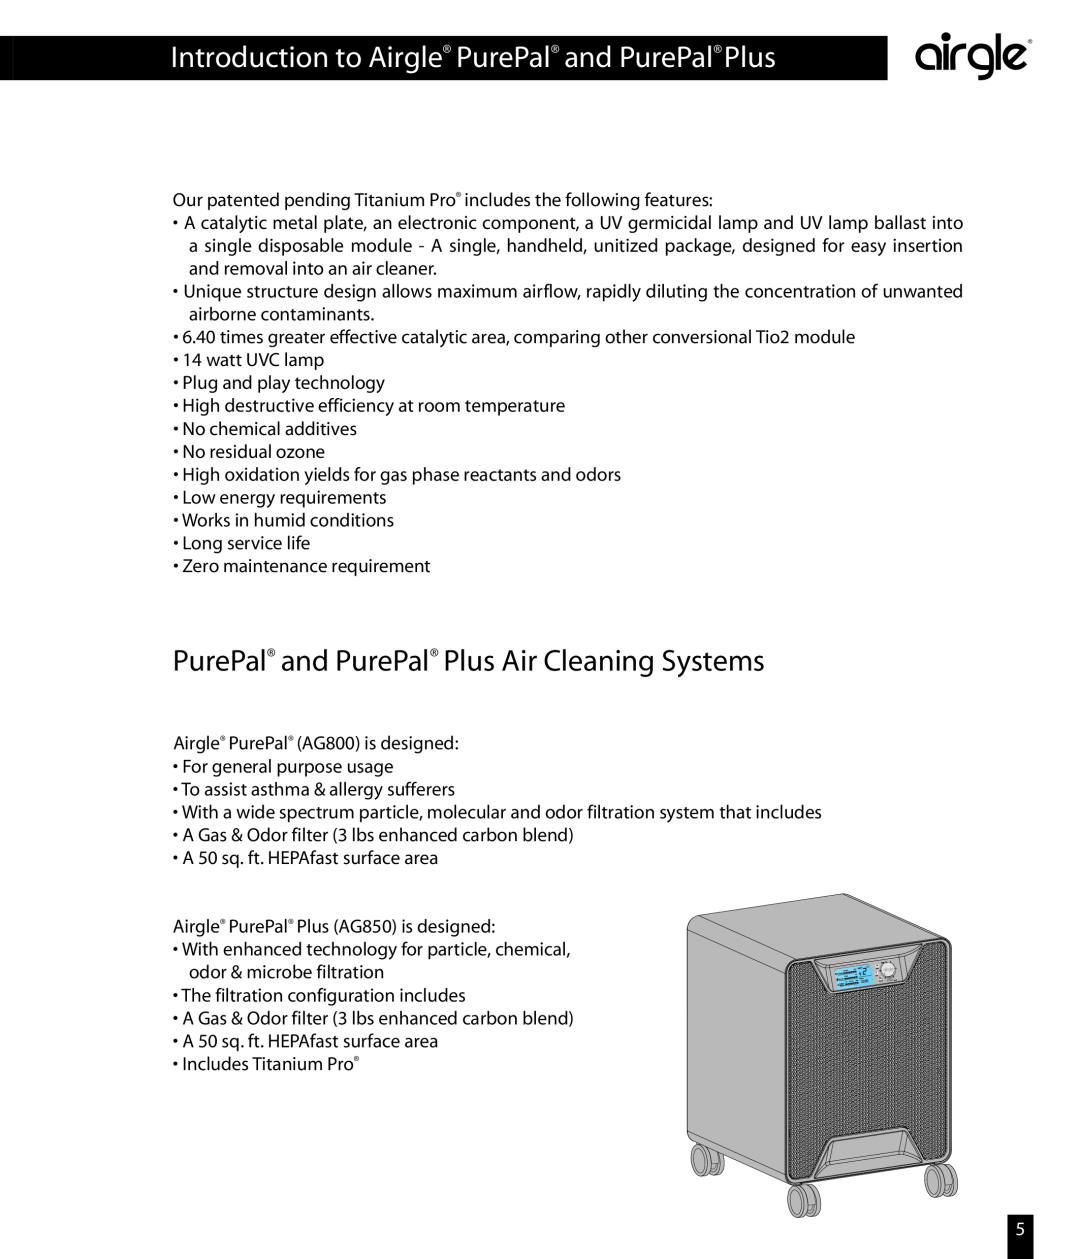 Airgle AG800, AG850 PurePal and PurePal Plus Air Cleaning Systems, Introduction to Airgle PurePal and PurePal Plus 